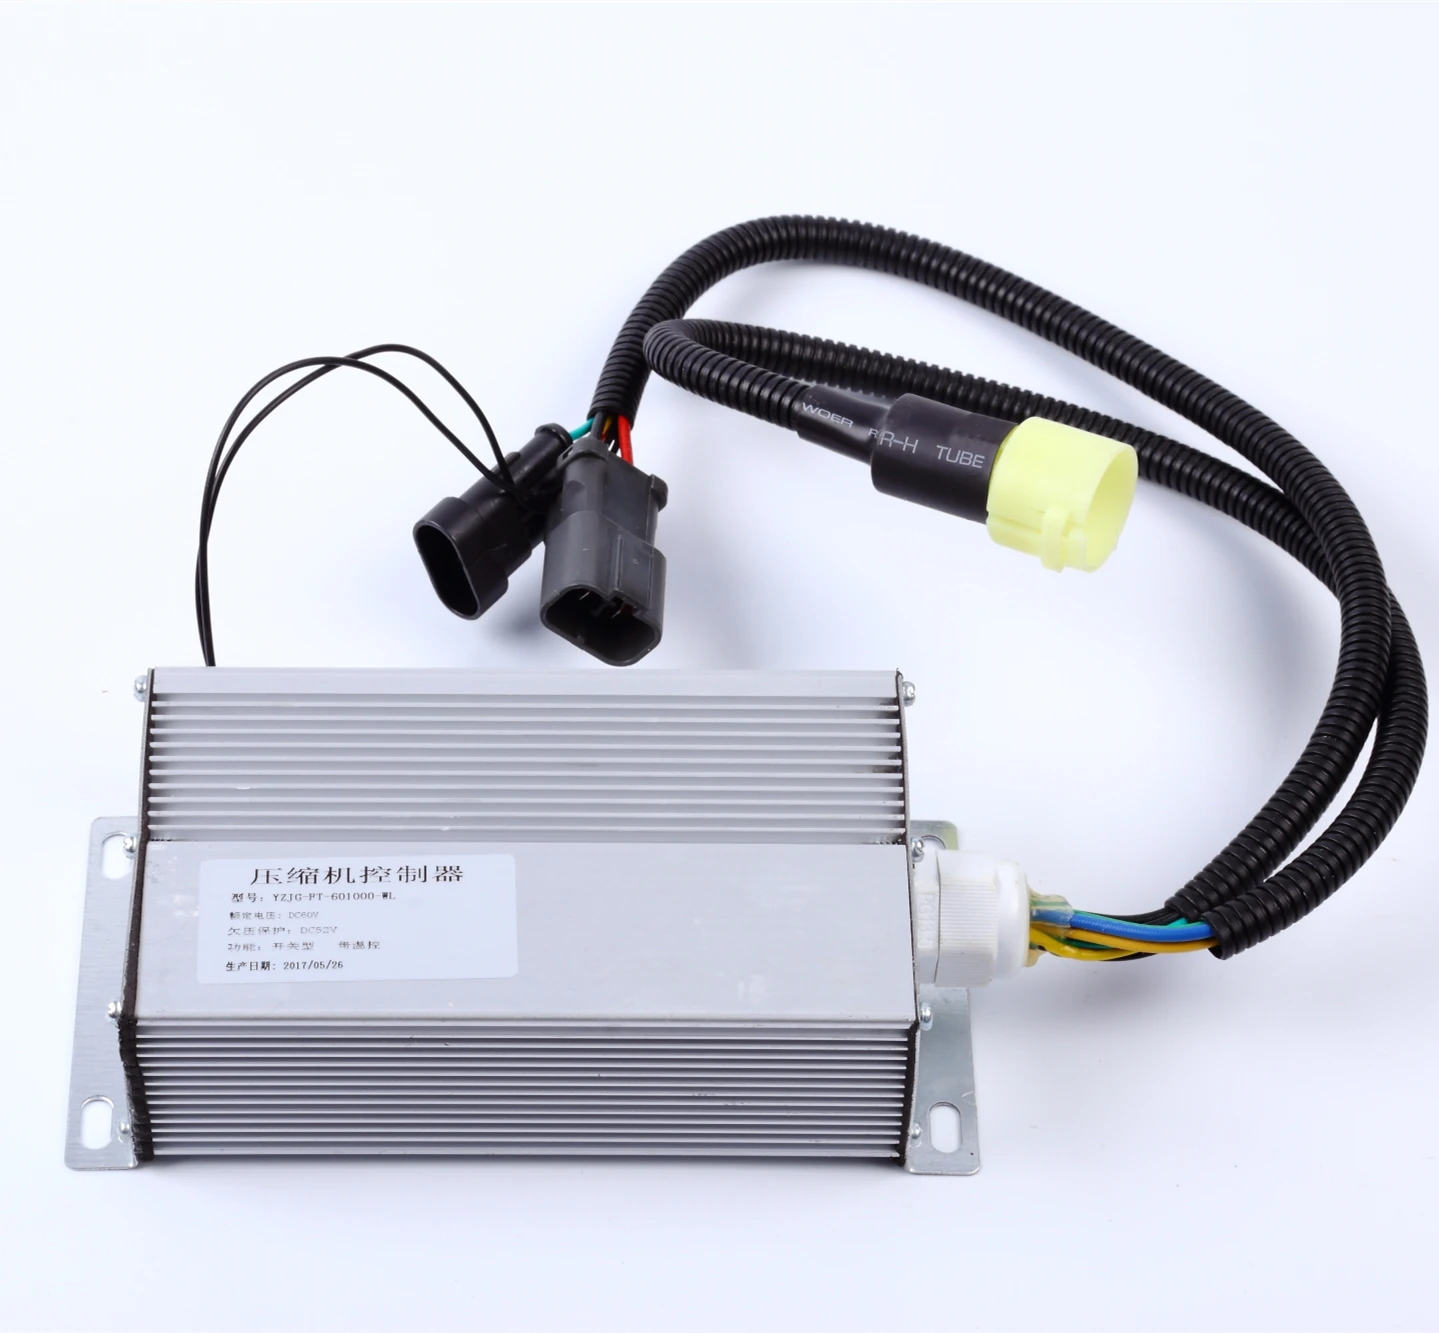 Electric vehicle air conditioning compressor controller 12v24v48v60v72v 7p0820803b 7p0820803g 7p0820803h 7p0820803k for vw touareg q7 electric automotive car air conditioning compressor aircon parts